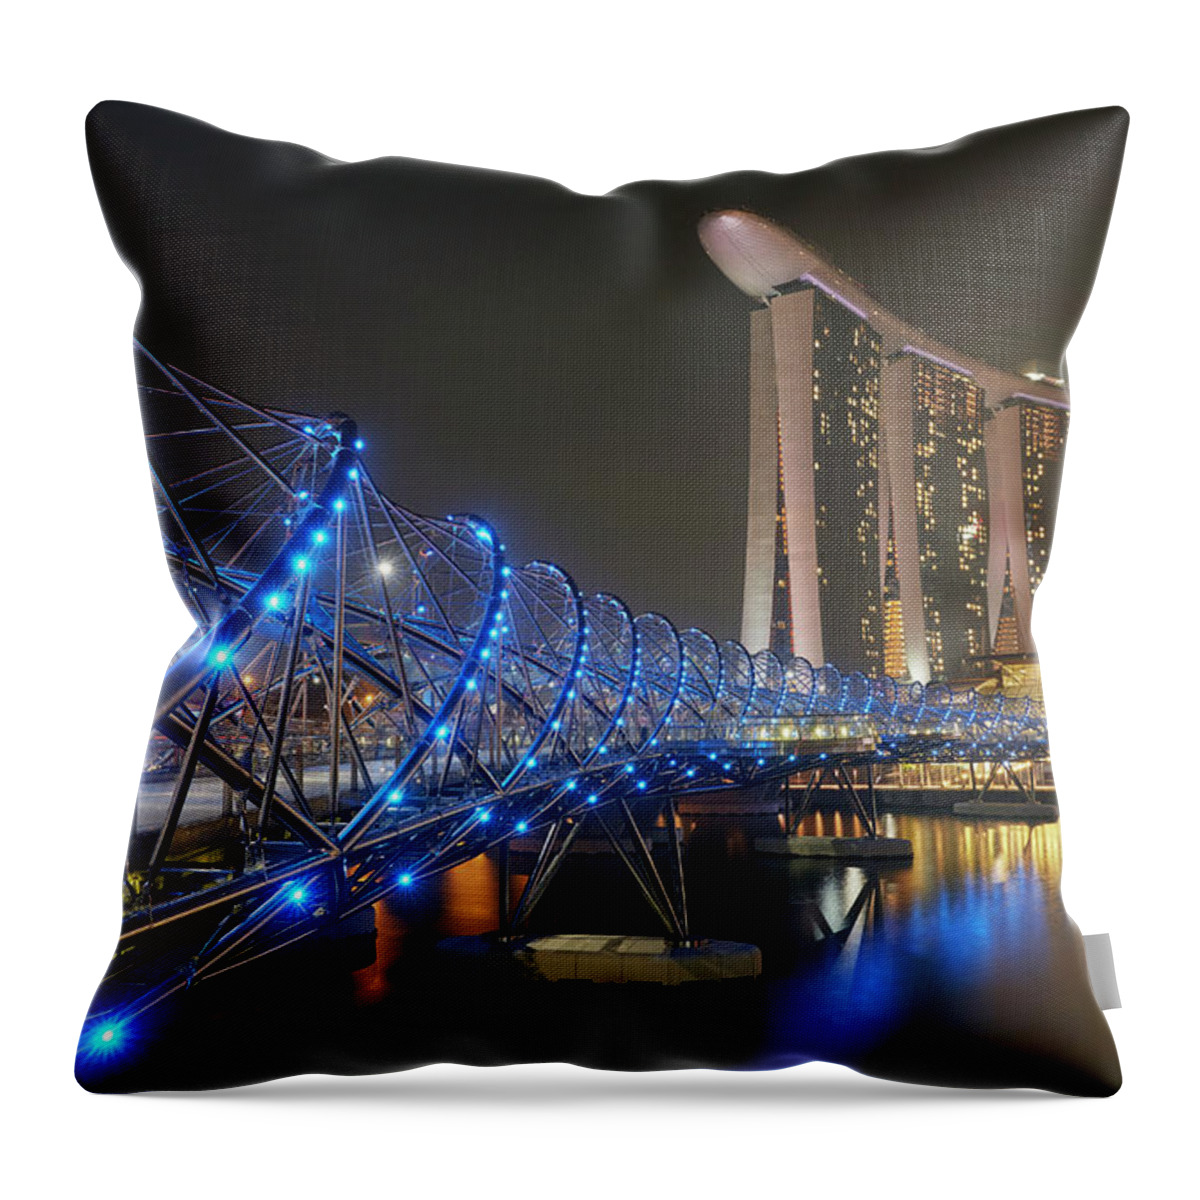 Tranquility Throw Pillow featuring the photograph Marina Bay Sands And Helix Bridge At by Allan Baxter